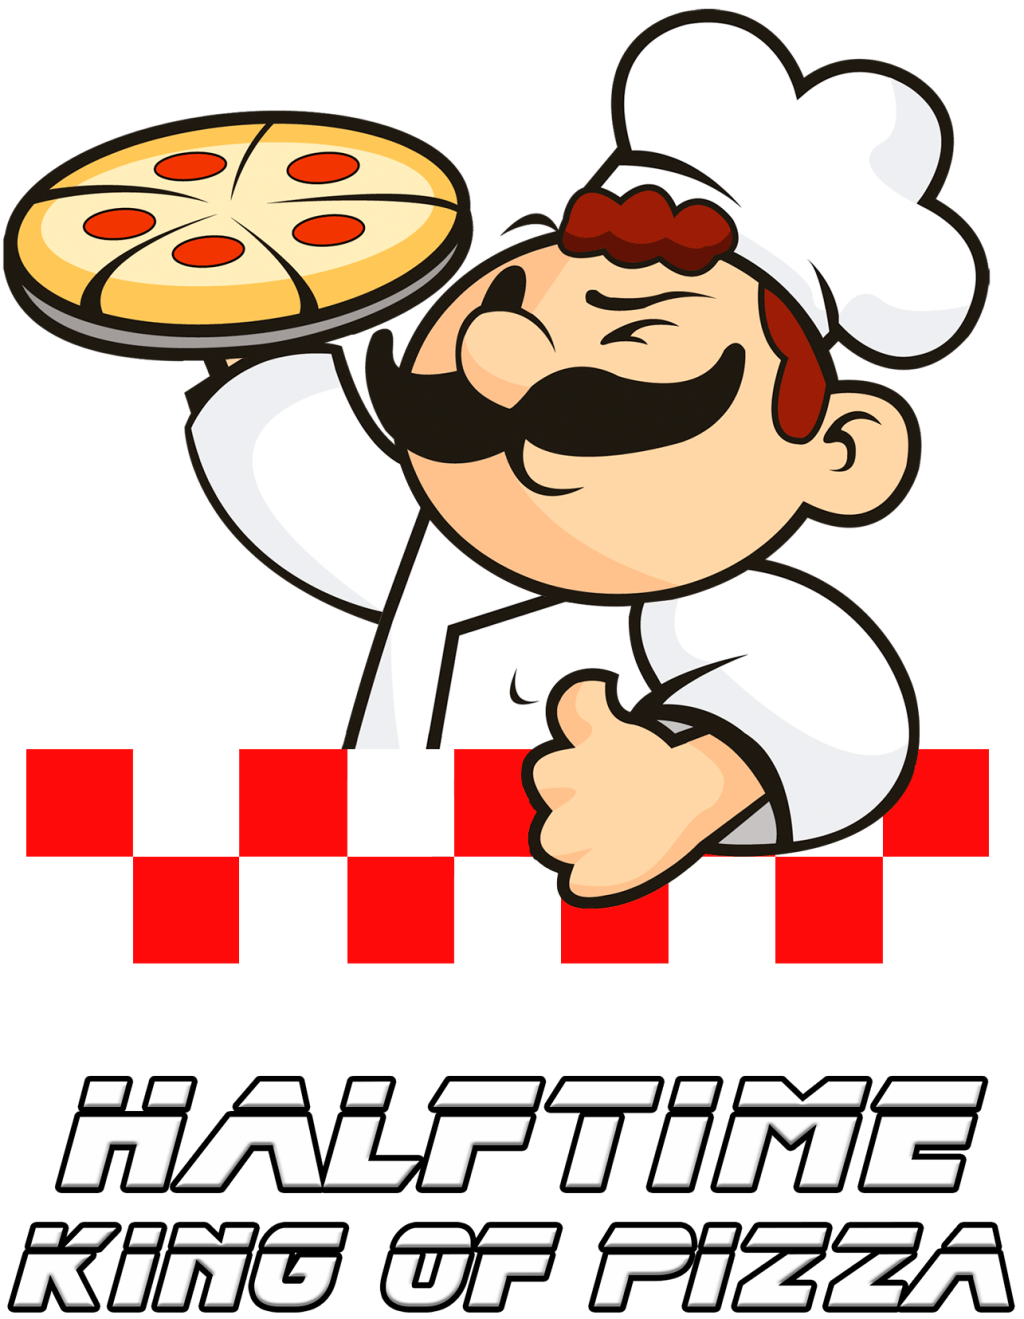 Halftime King of Pizza